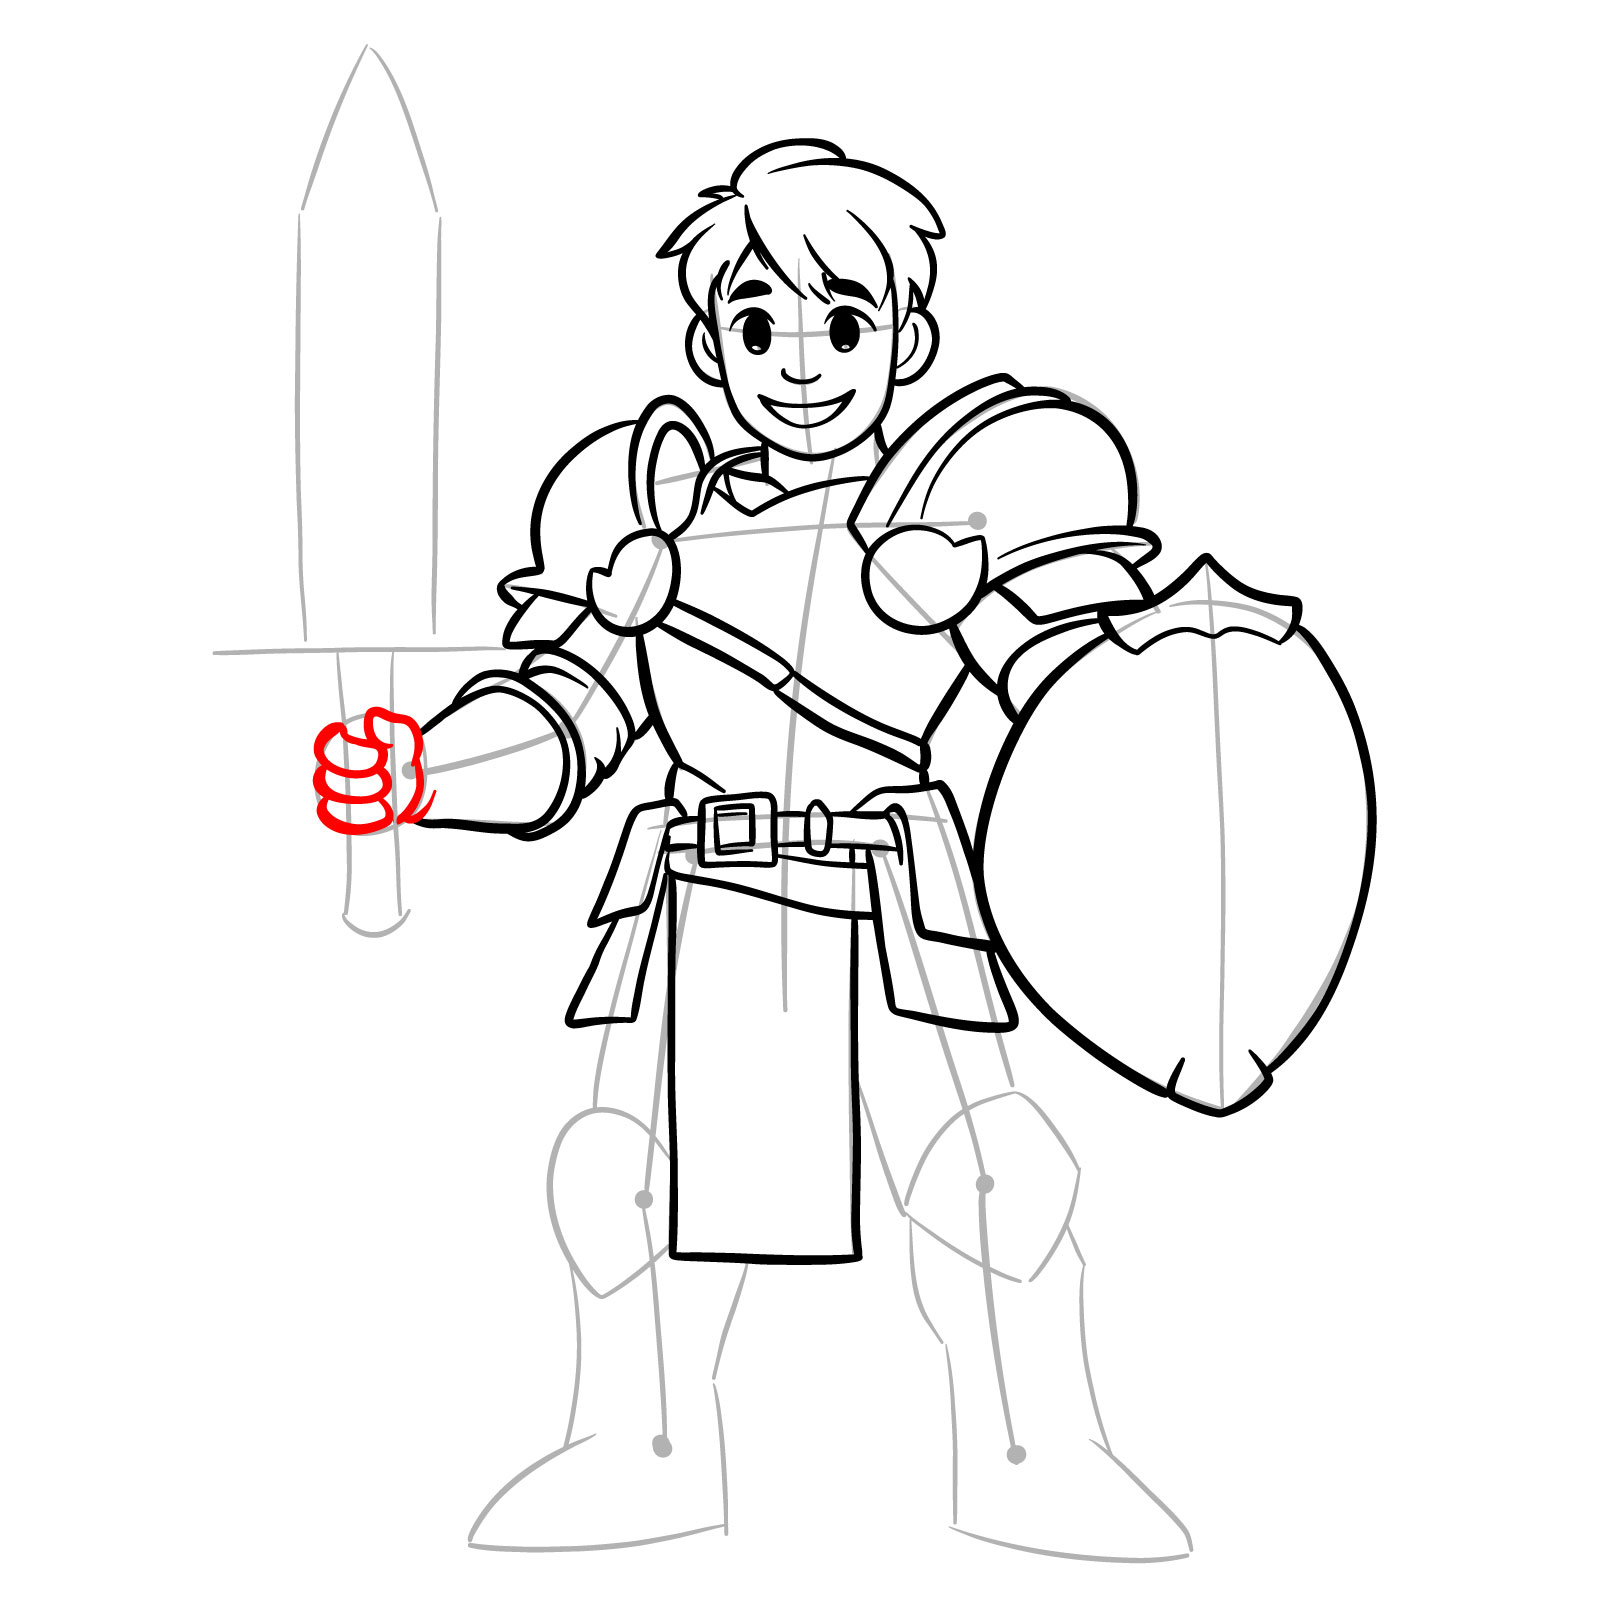 How to draw a paladin - step 15